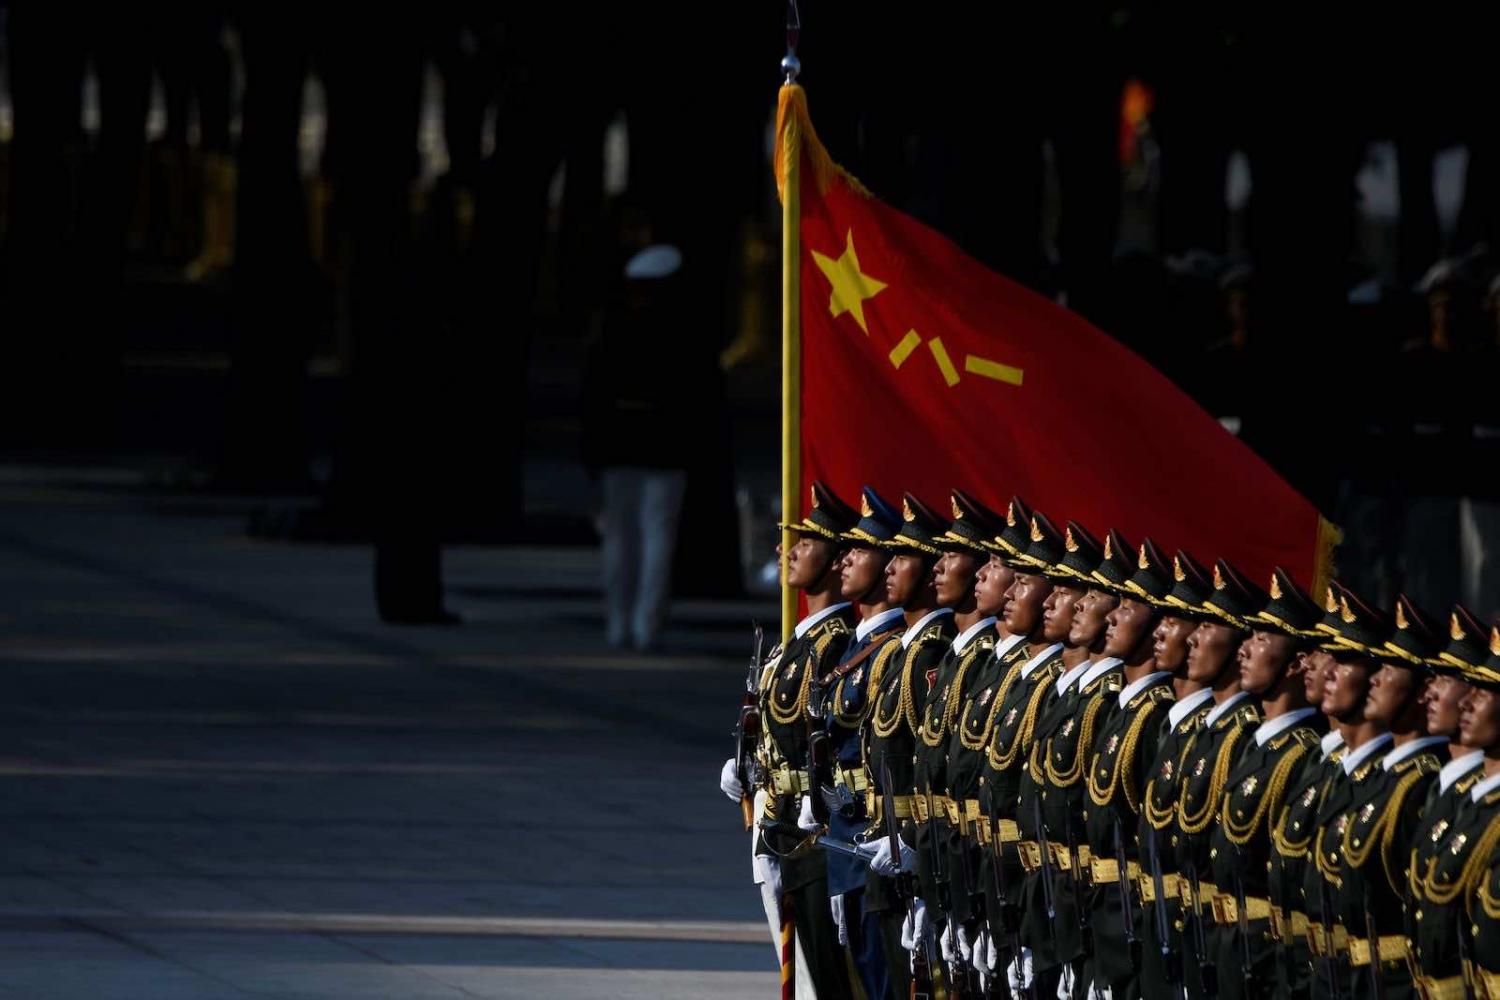 As China builds its strategic arsenal while also becoming increasingly aggressive in the region, the risks of miscalculation and crisis seemingly increase (Wang Zhao/AFP via Getty Images)